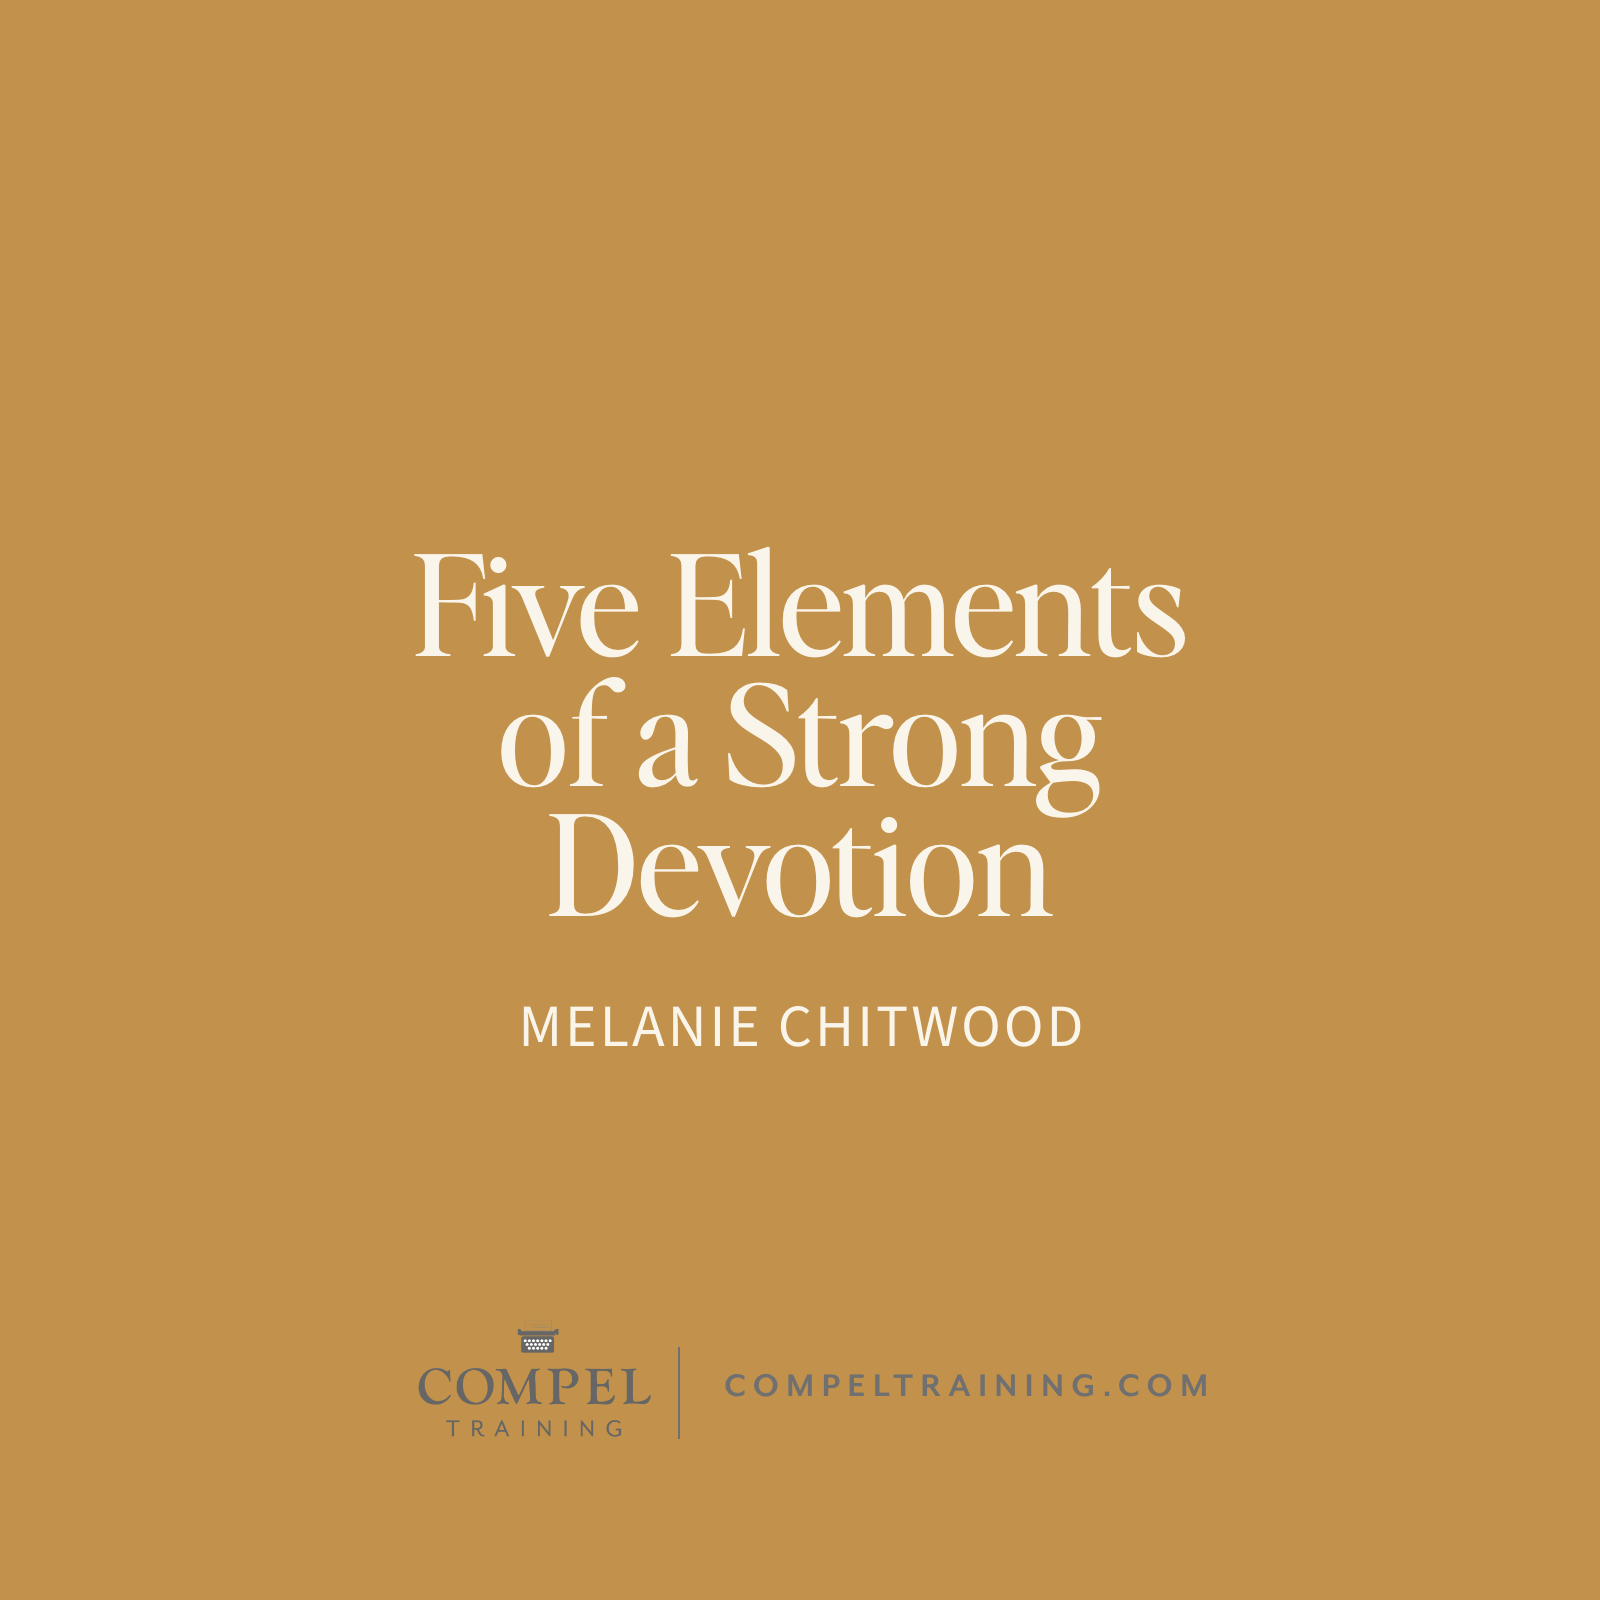 Five Elements of a Strong Devotion